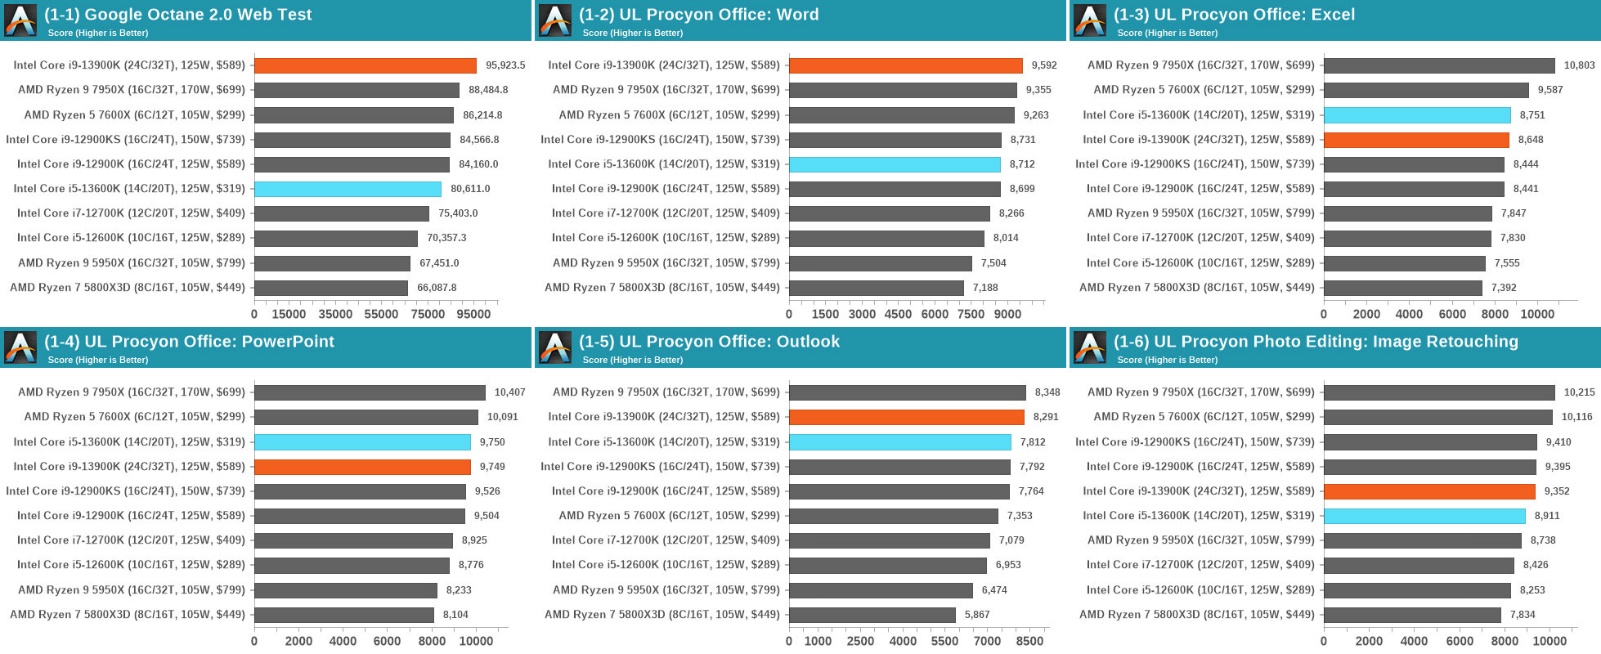 Benchmark of Intel's 13th generation Raptor Lake processor in office software